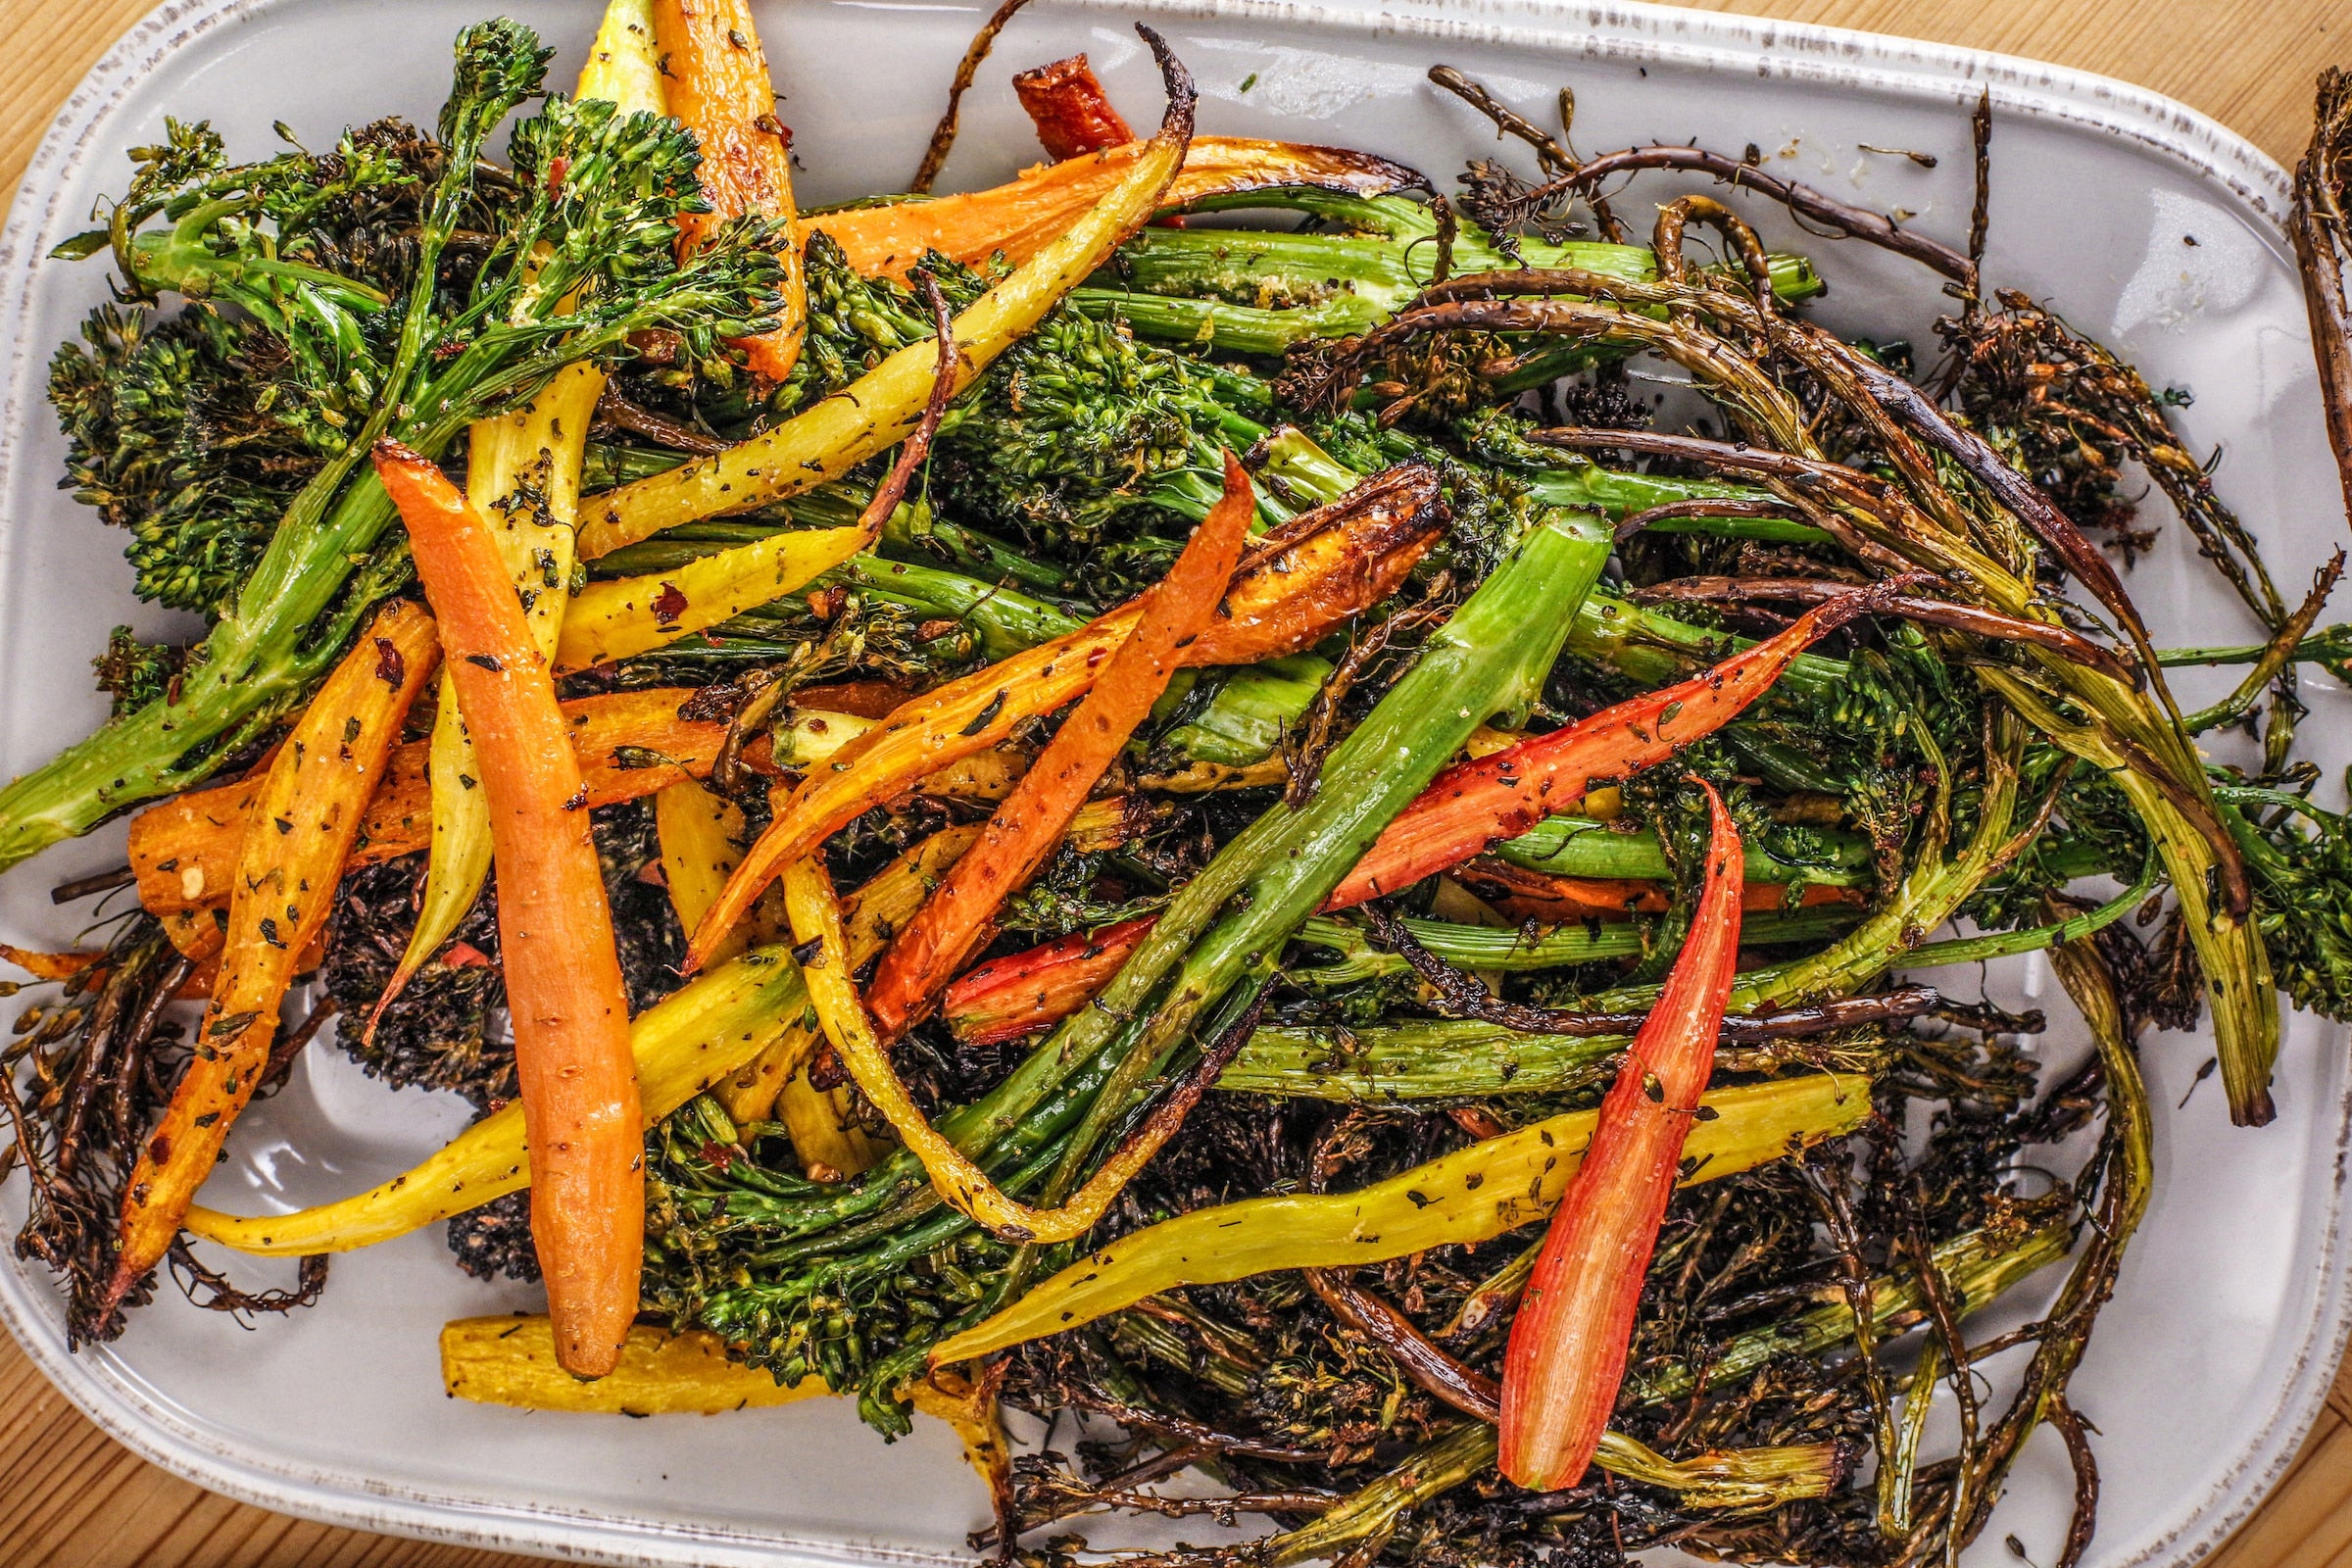 Rachael's Roasted Broccolini and Baby Carrots